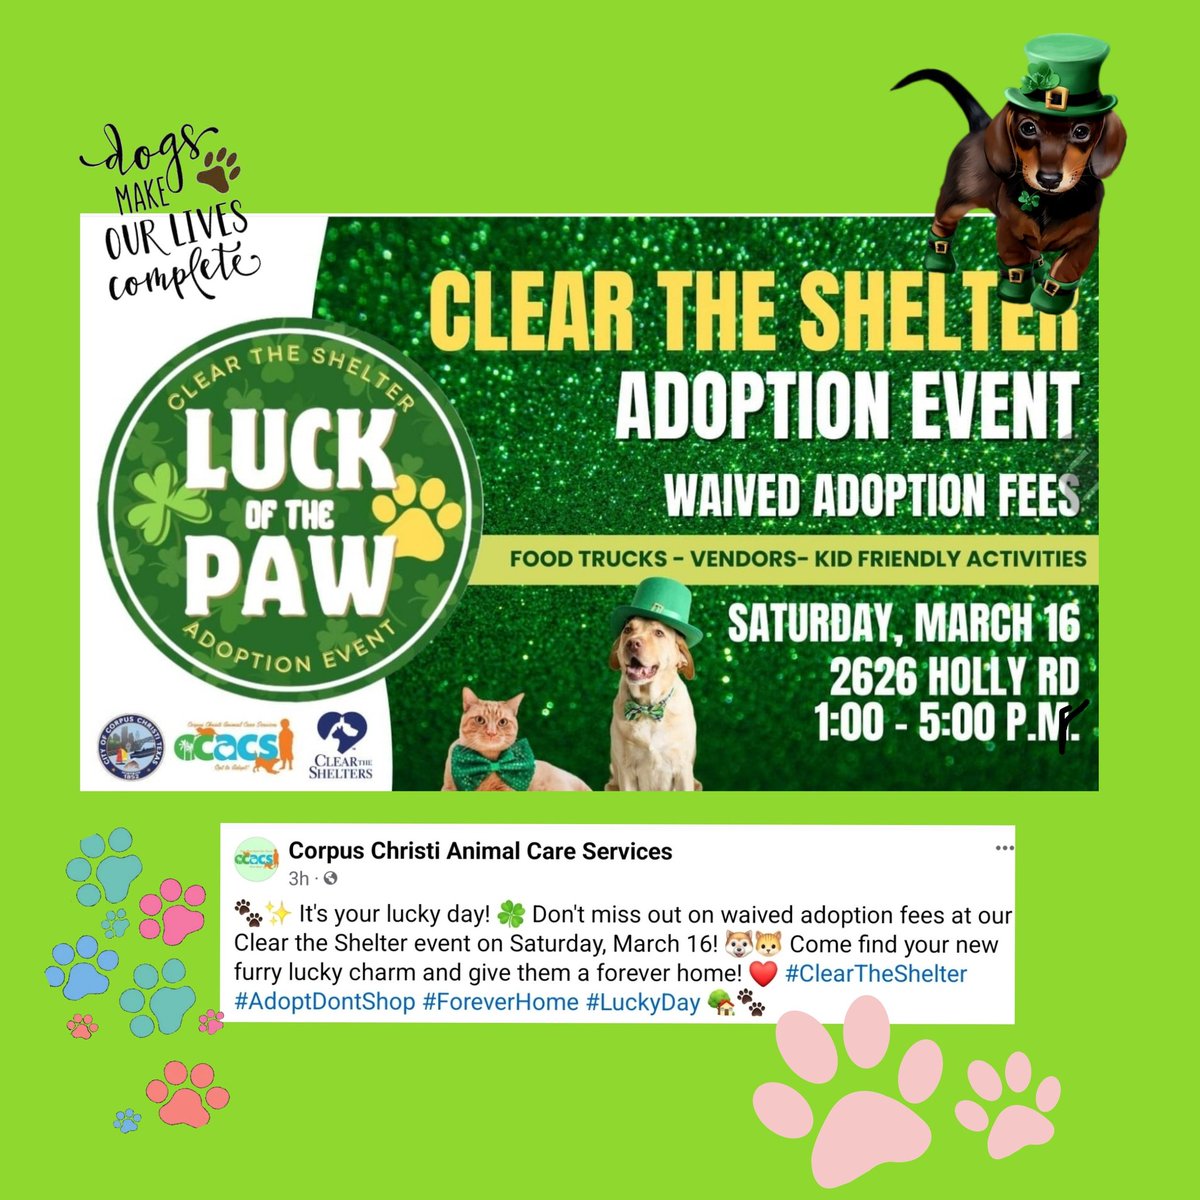 #CorpusChristiACS #CorpusChristi #TX
Adoption event, shelter support day 3/16/2023
Please help publicize this event #SavePetsLives